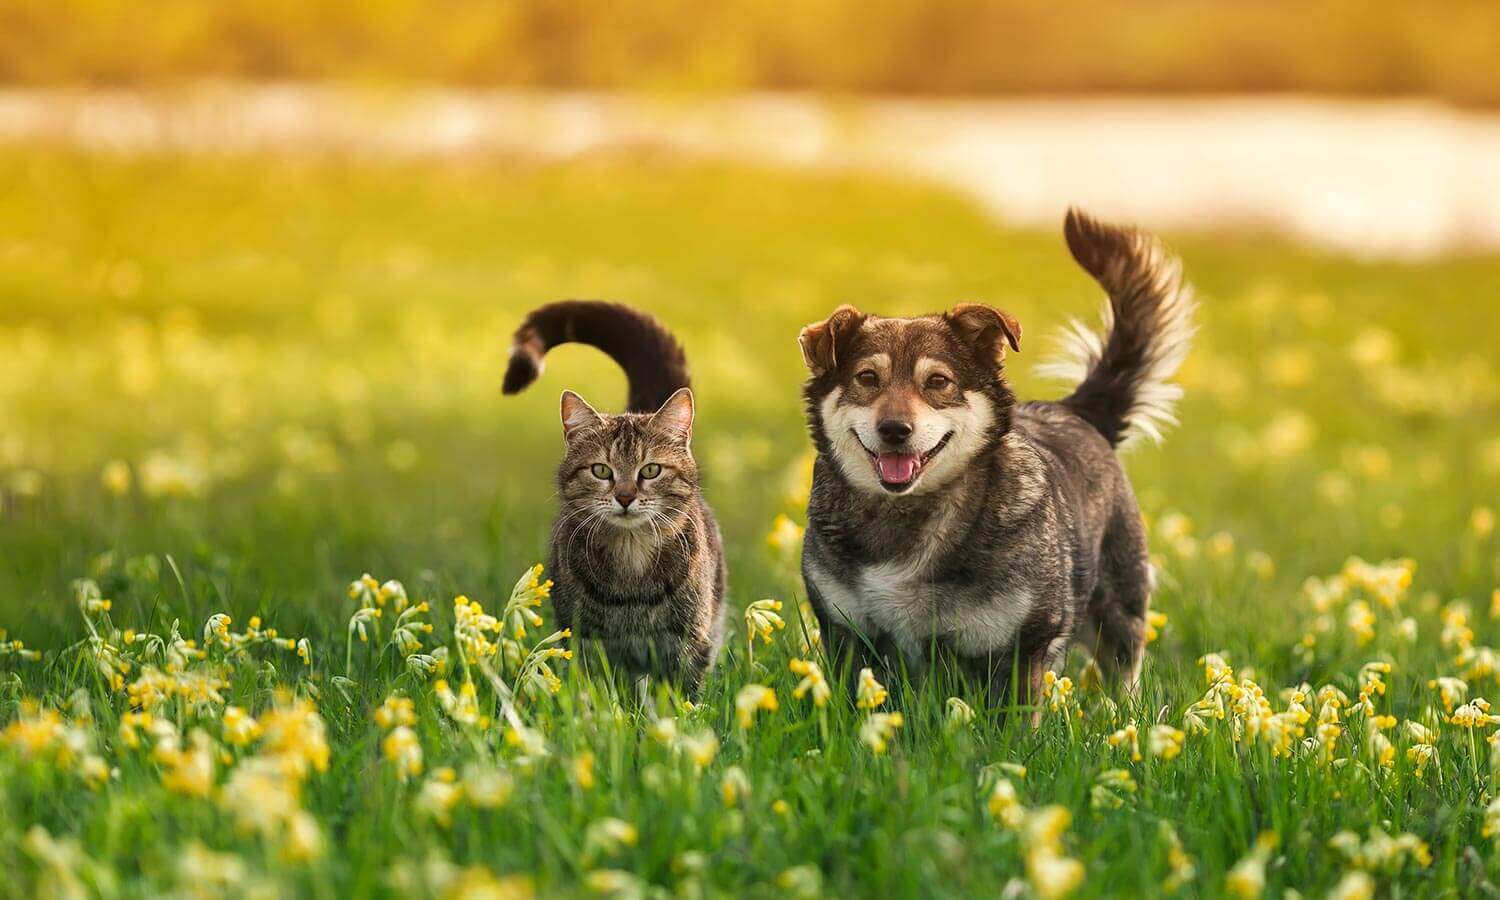 A dog and cat in a field